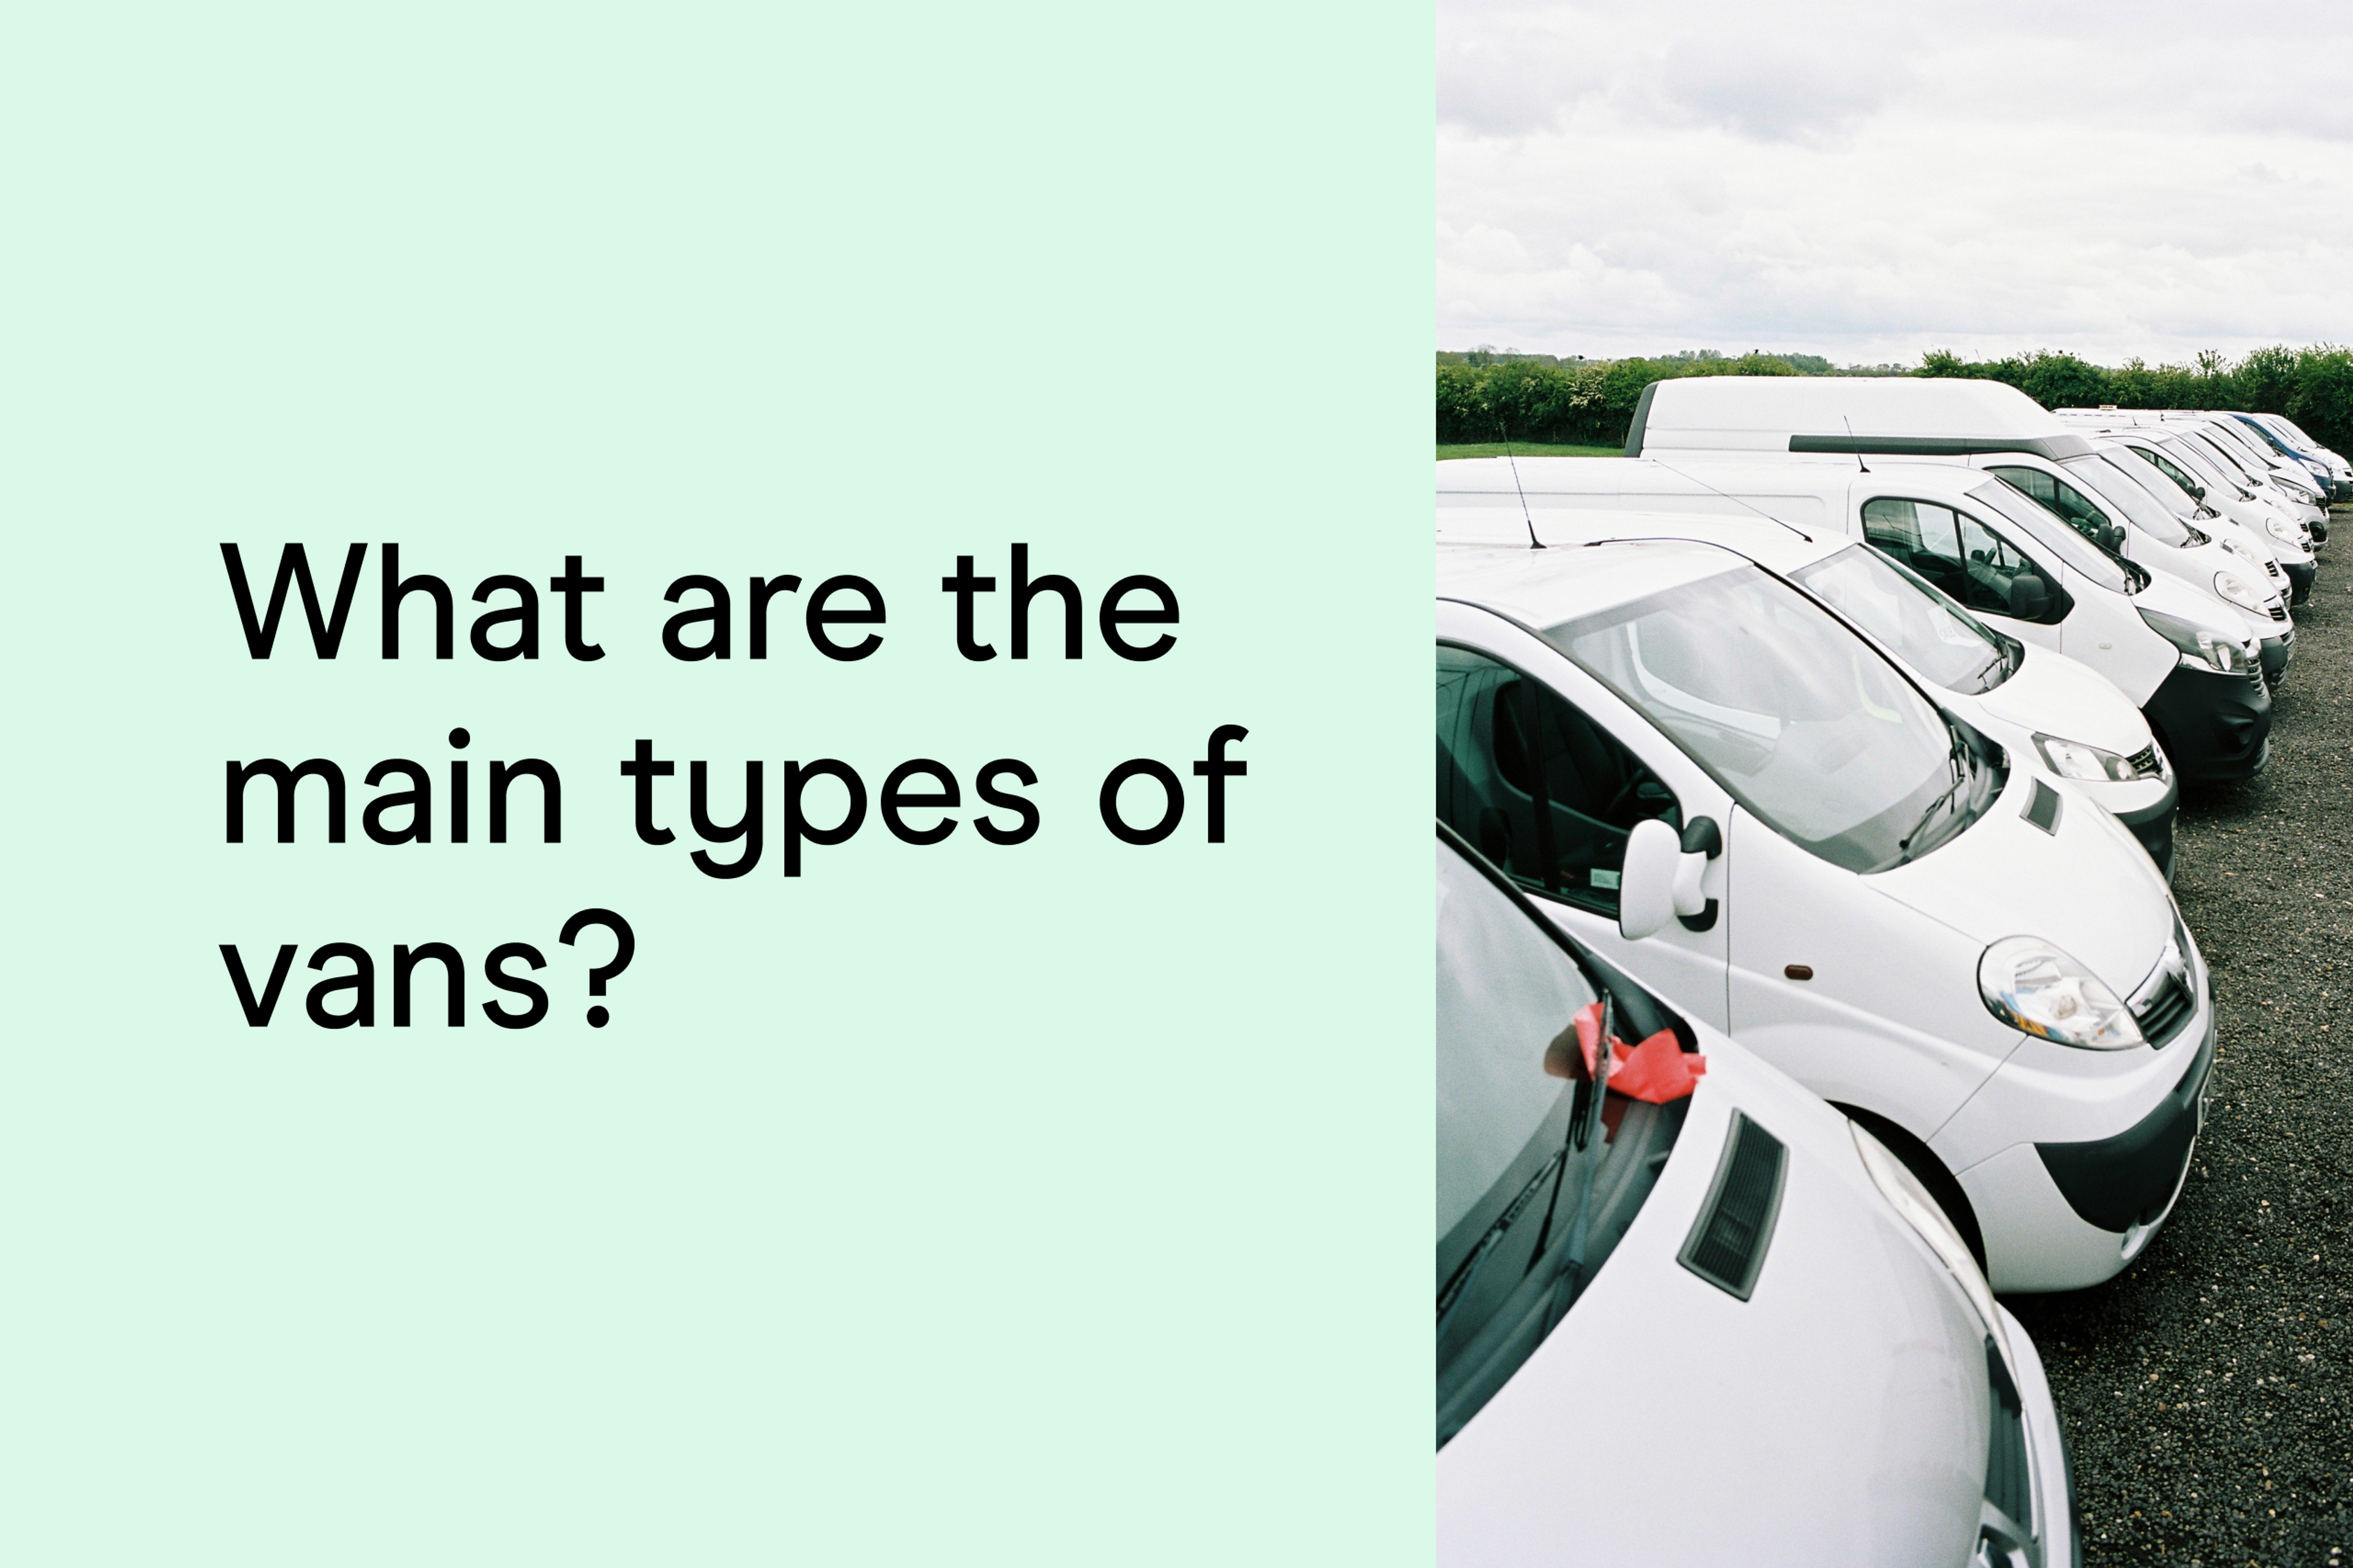 What are the main types of vans?